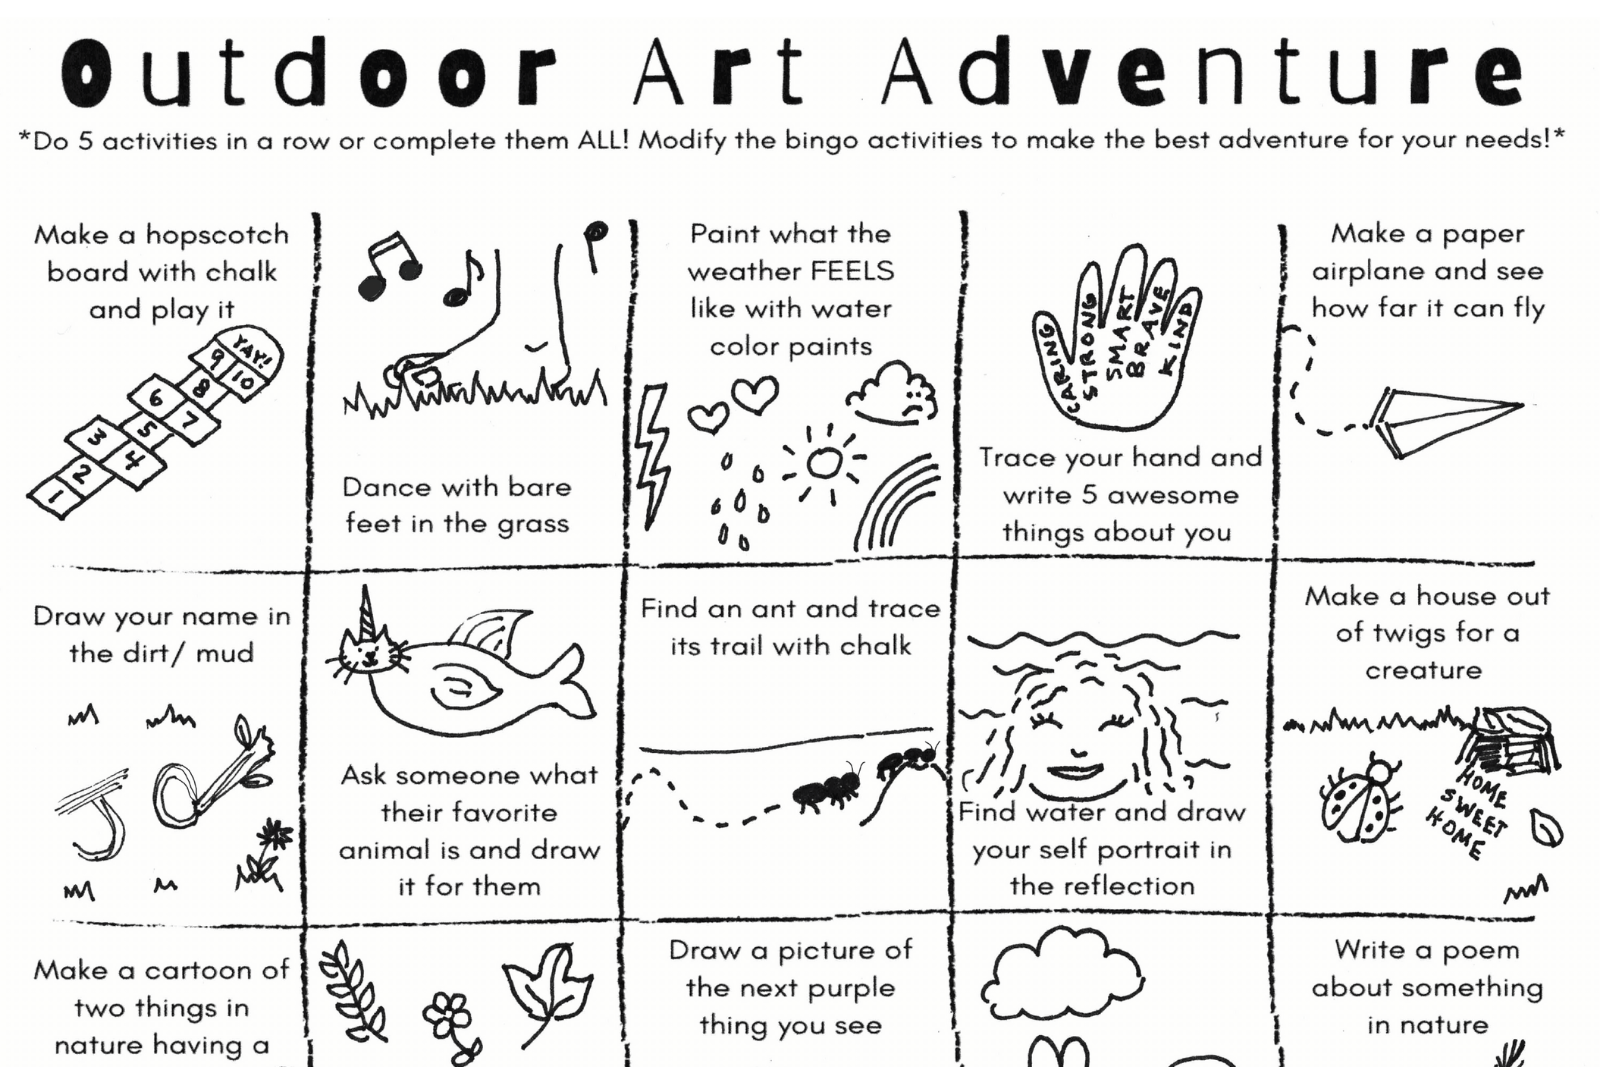 Outdoor art adventure bing card map inlcuding activities like make a paper airplane play hopscotch and draw a picture of your favorite animal